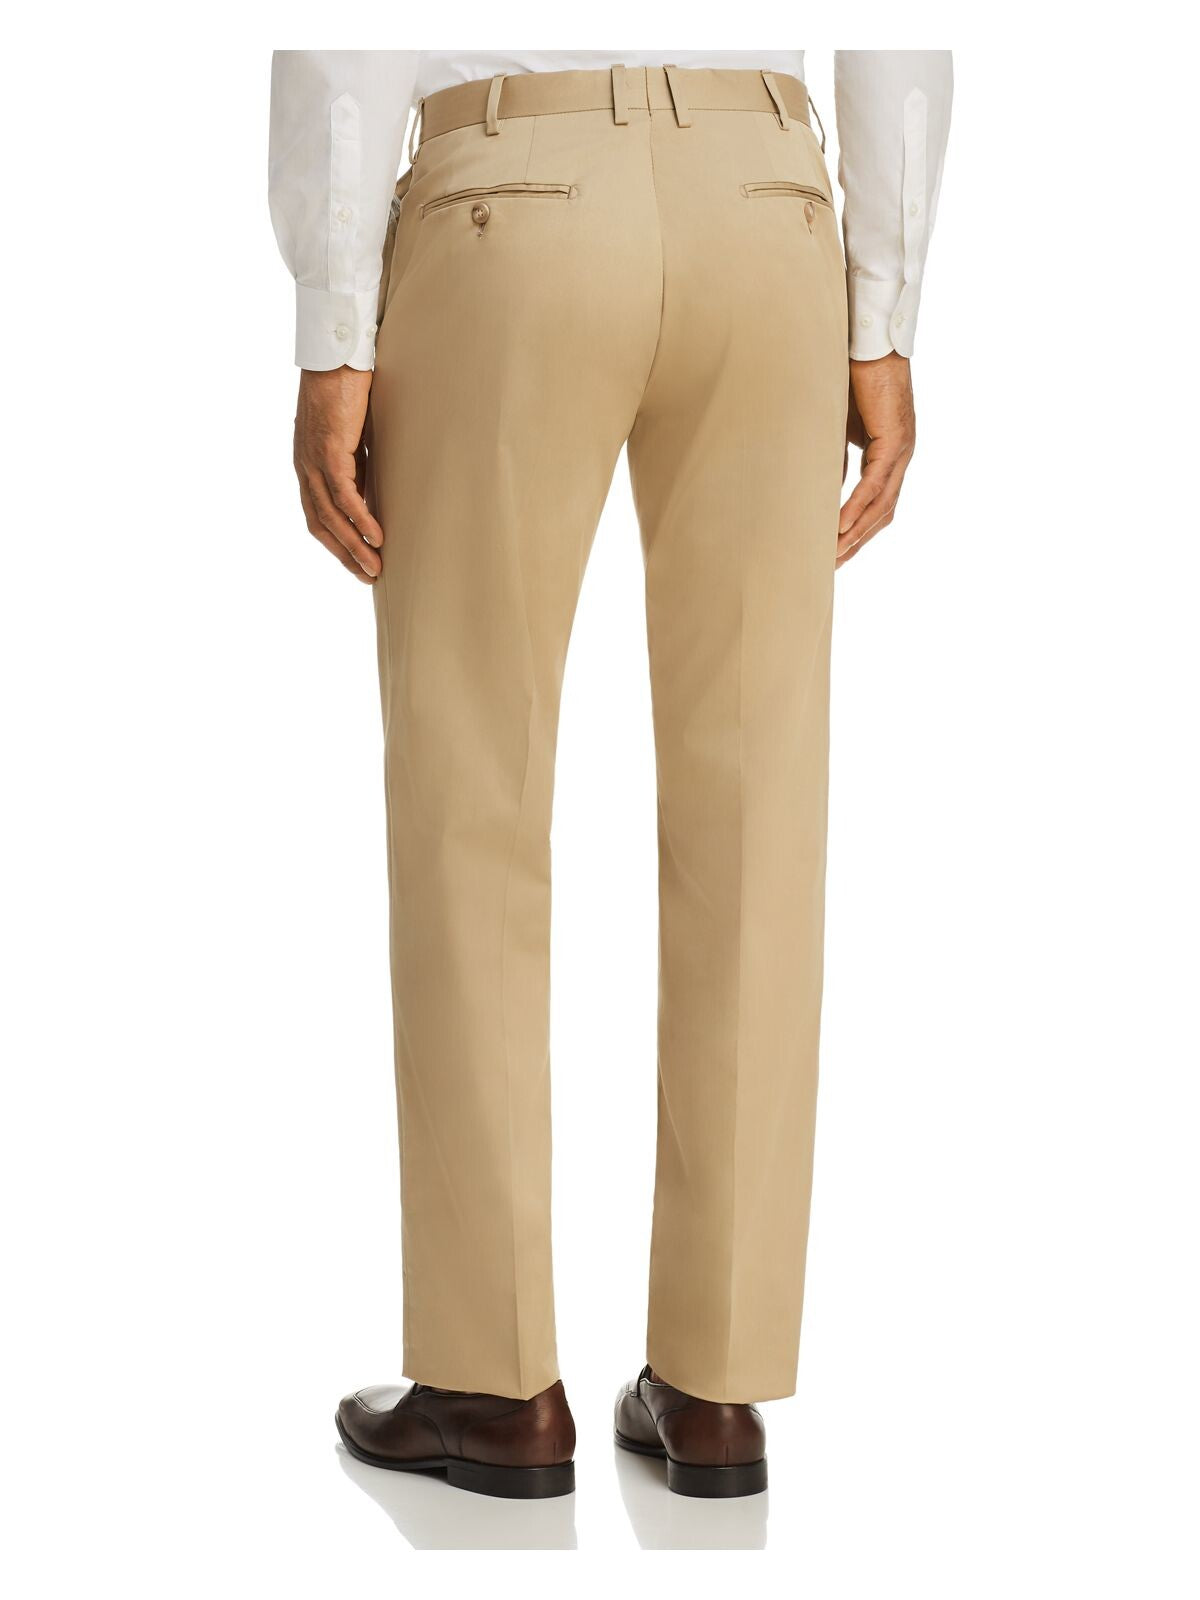 The Mens store Mens Beige Flat Front, Tapered, Regular Fit Cotton Blend Suit Separate Pants 40R